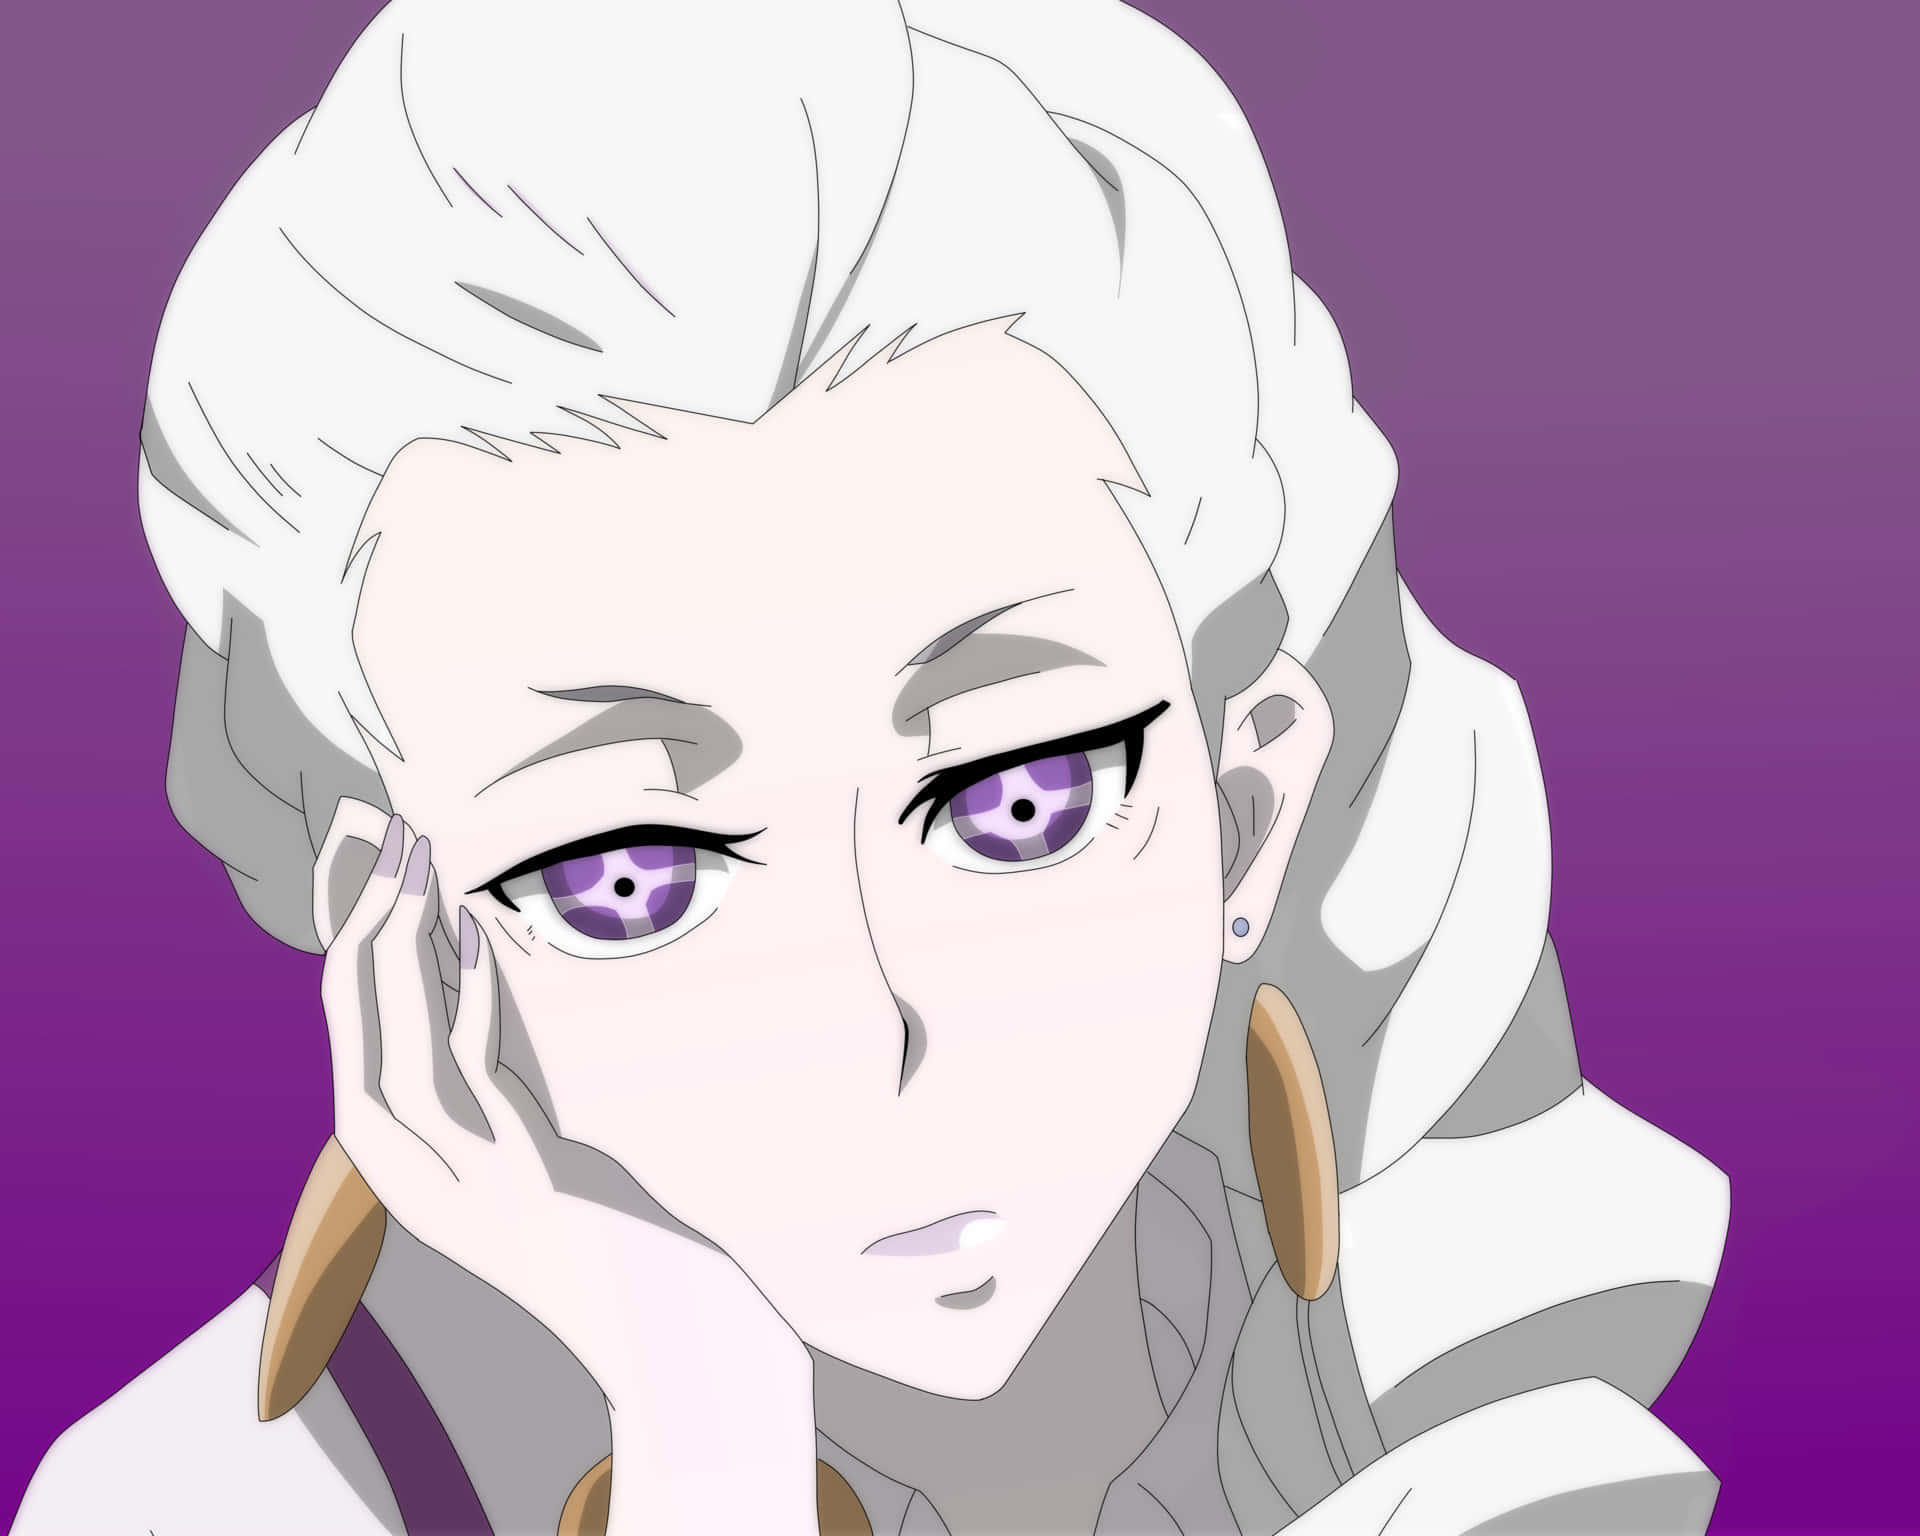 A White Anime Character With Purple Eyes